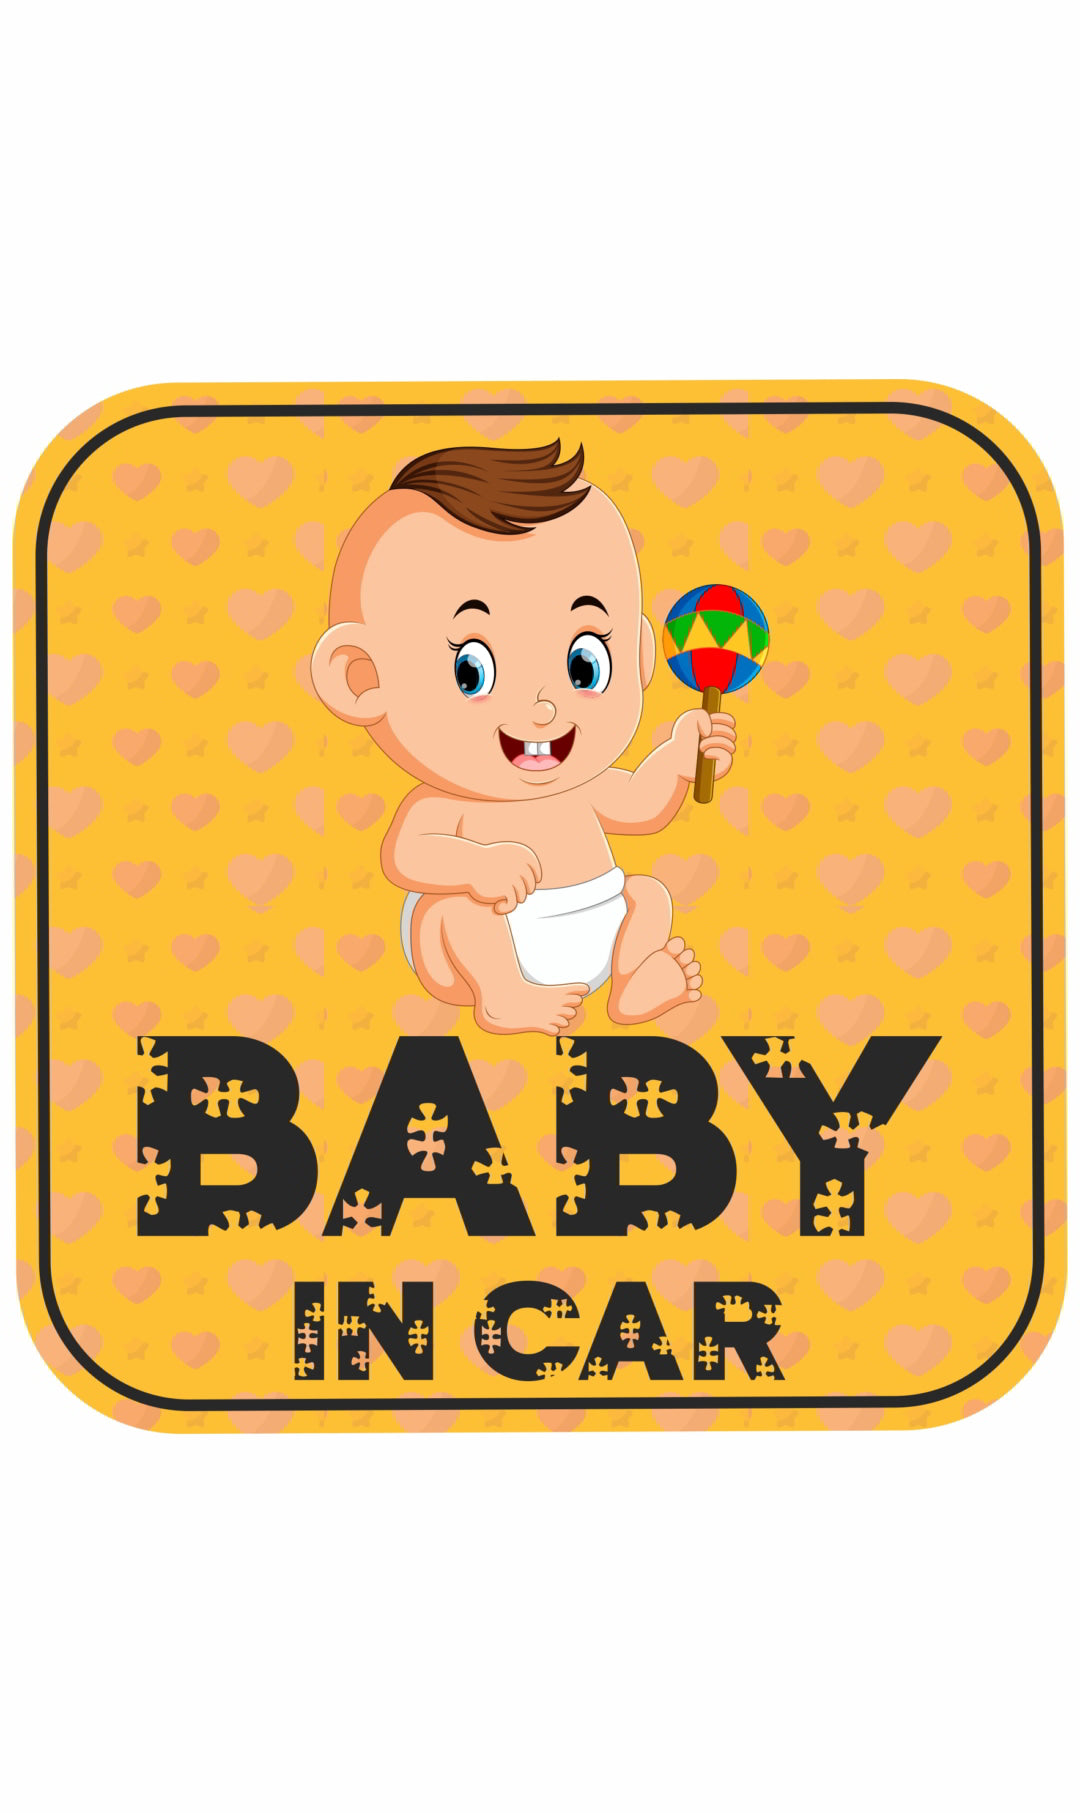 Baby in Car Decal Sticker(2pc)_c35